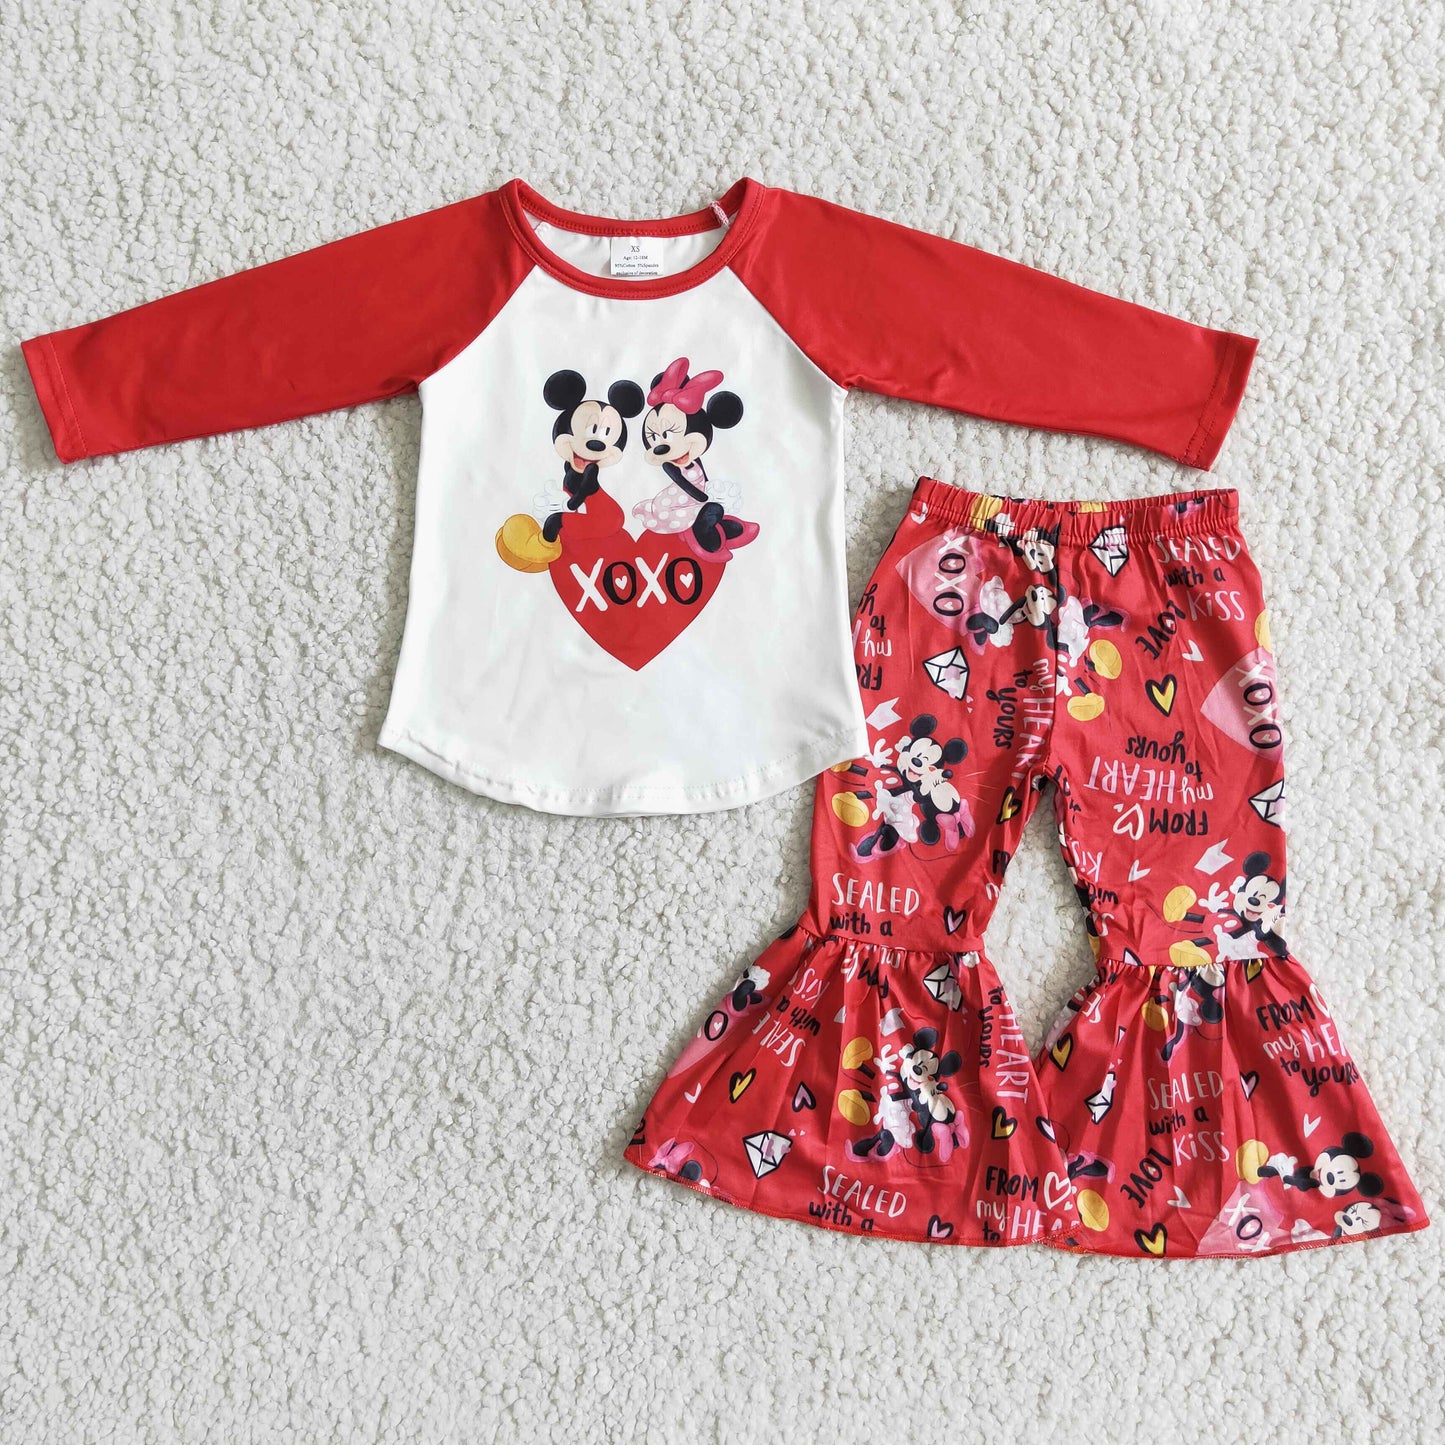 Heart mouse print red bell bottom pants girls Valentine's day clothing